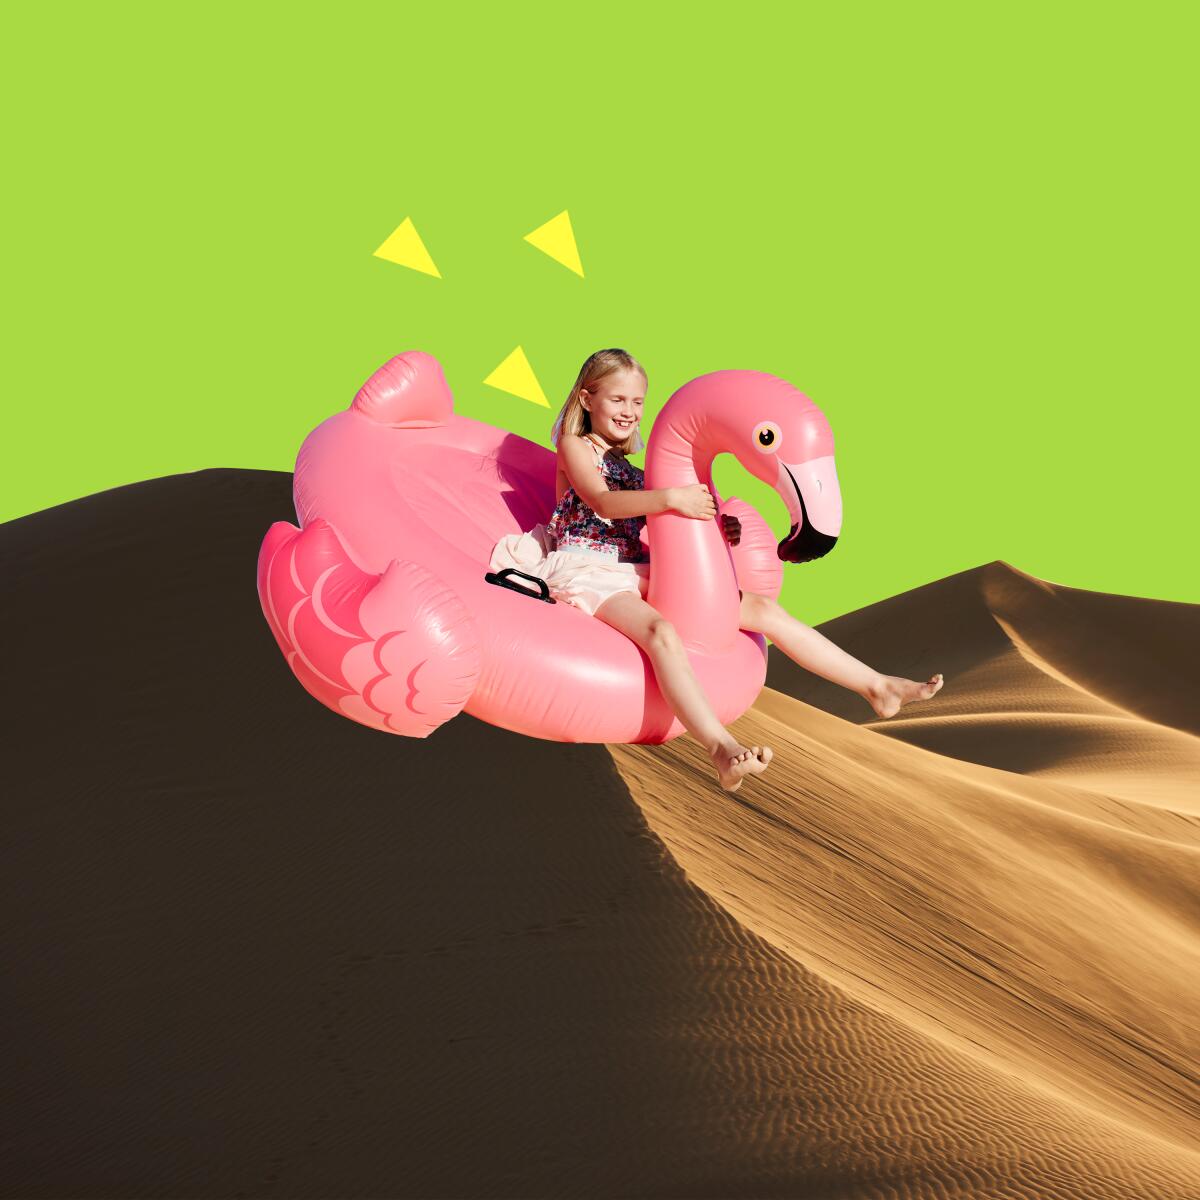 Illustration shows a girl on a blow-up flamingo pool toy sliding on a sand dune.